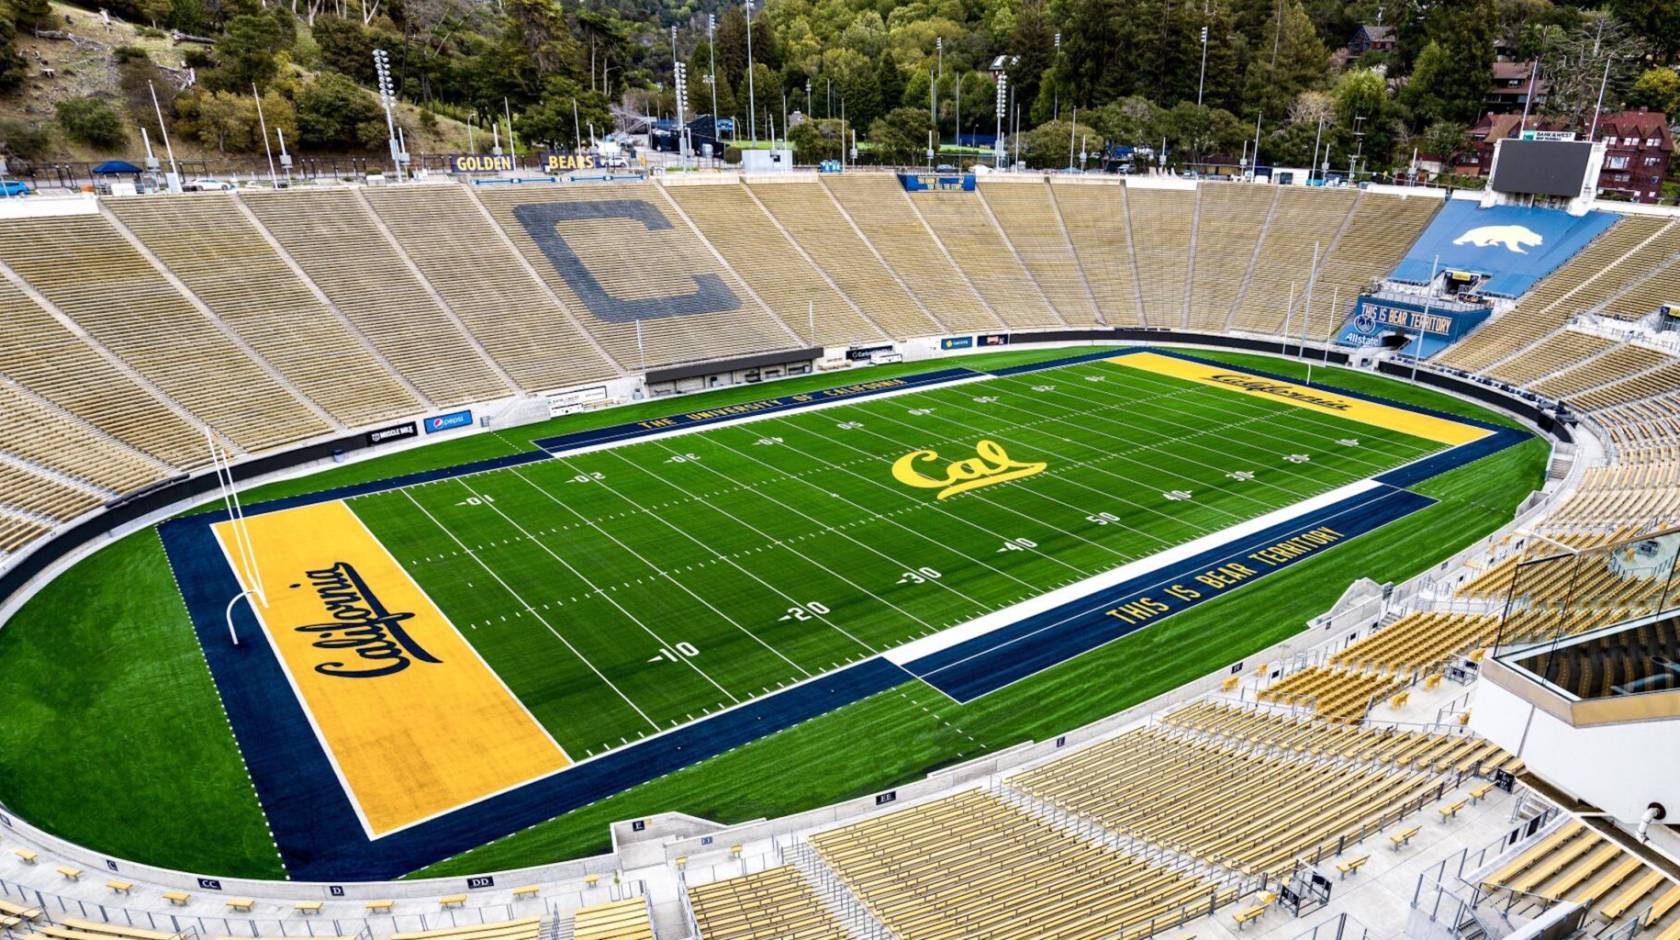 UC Berkeley football stadium from above without the Pac-12 logo